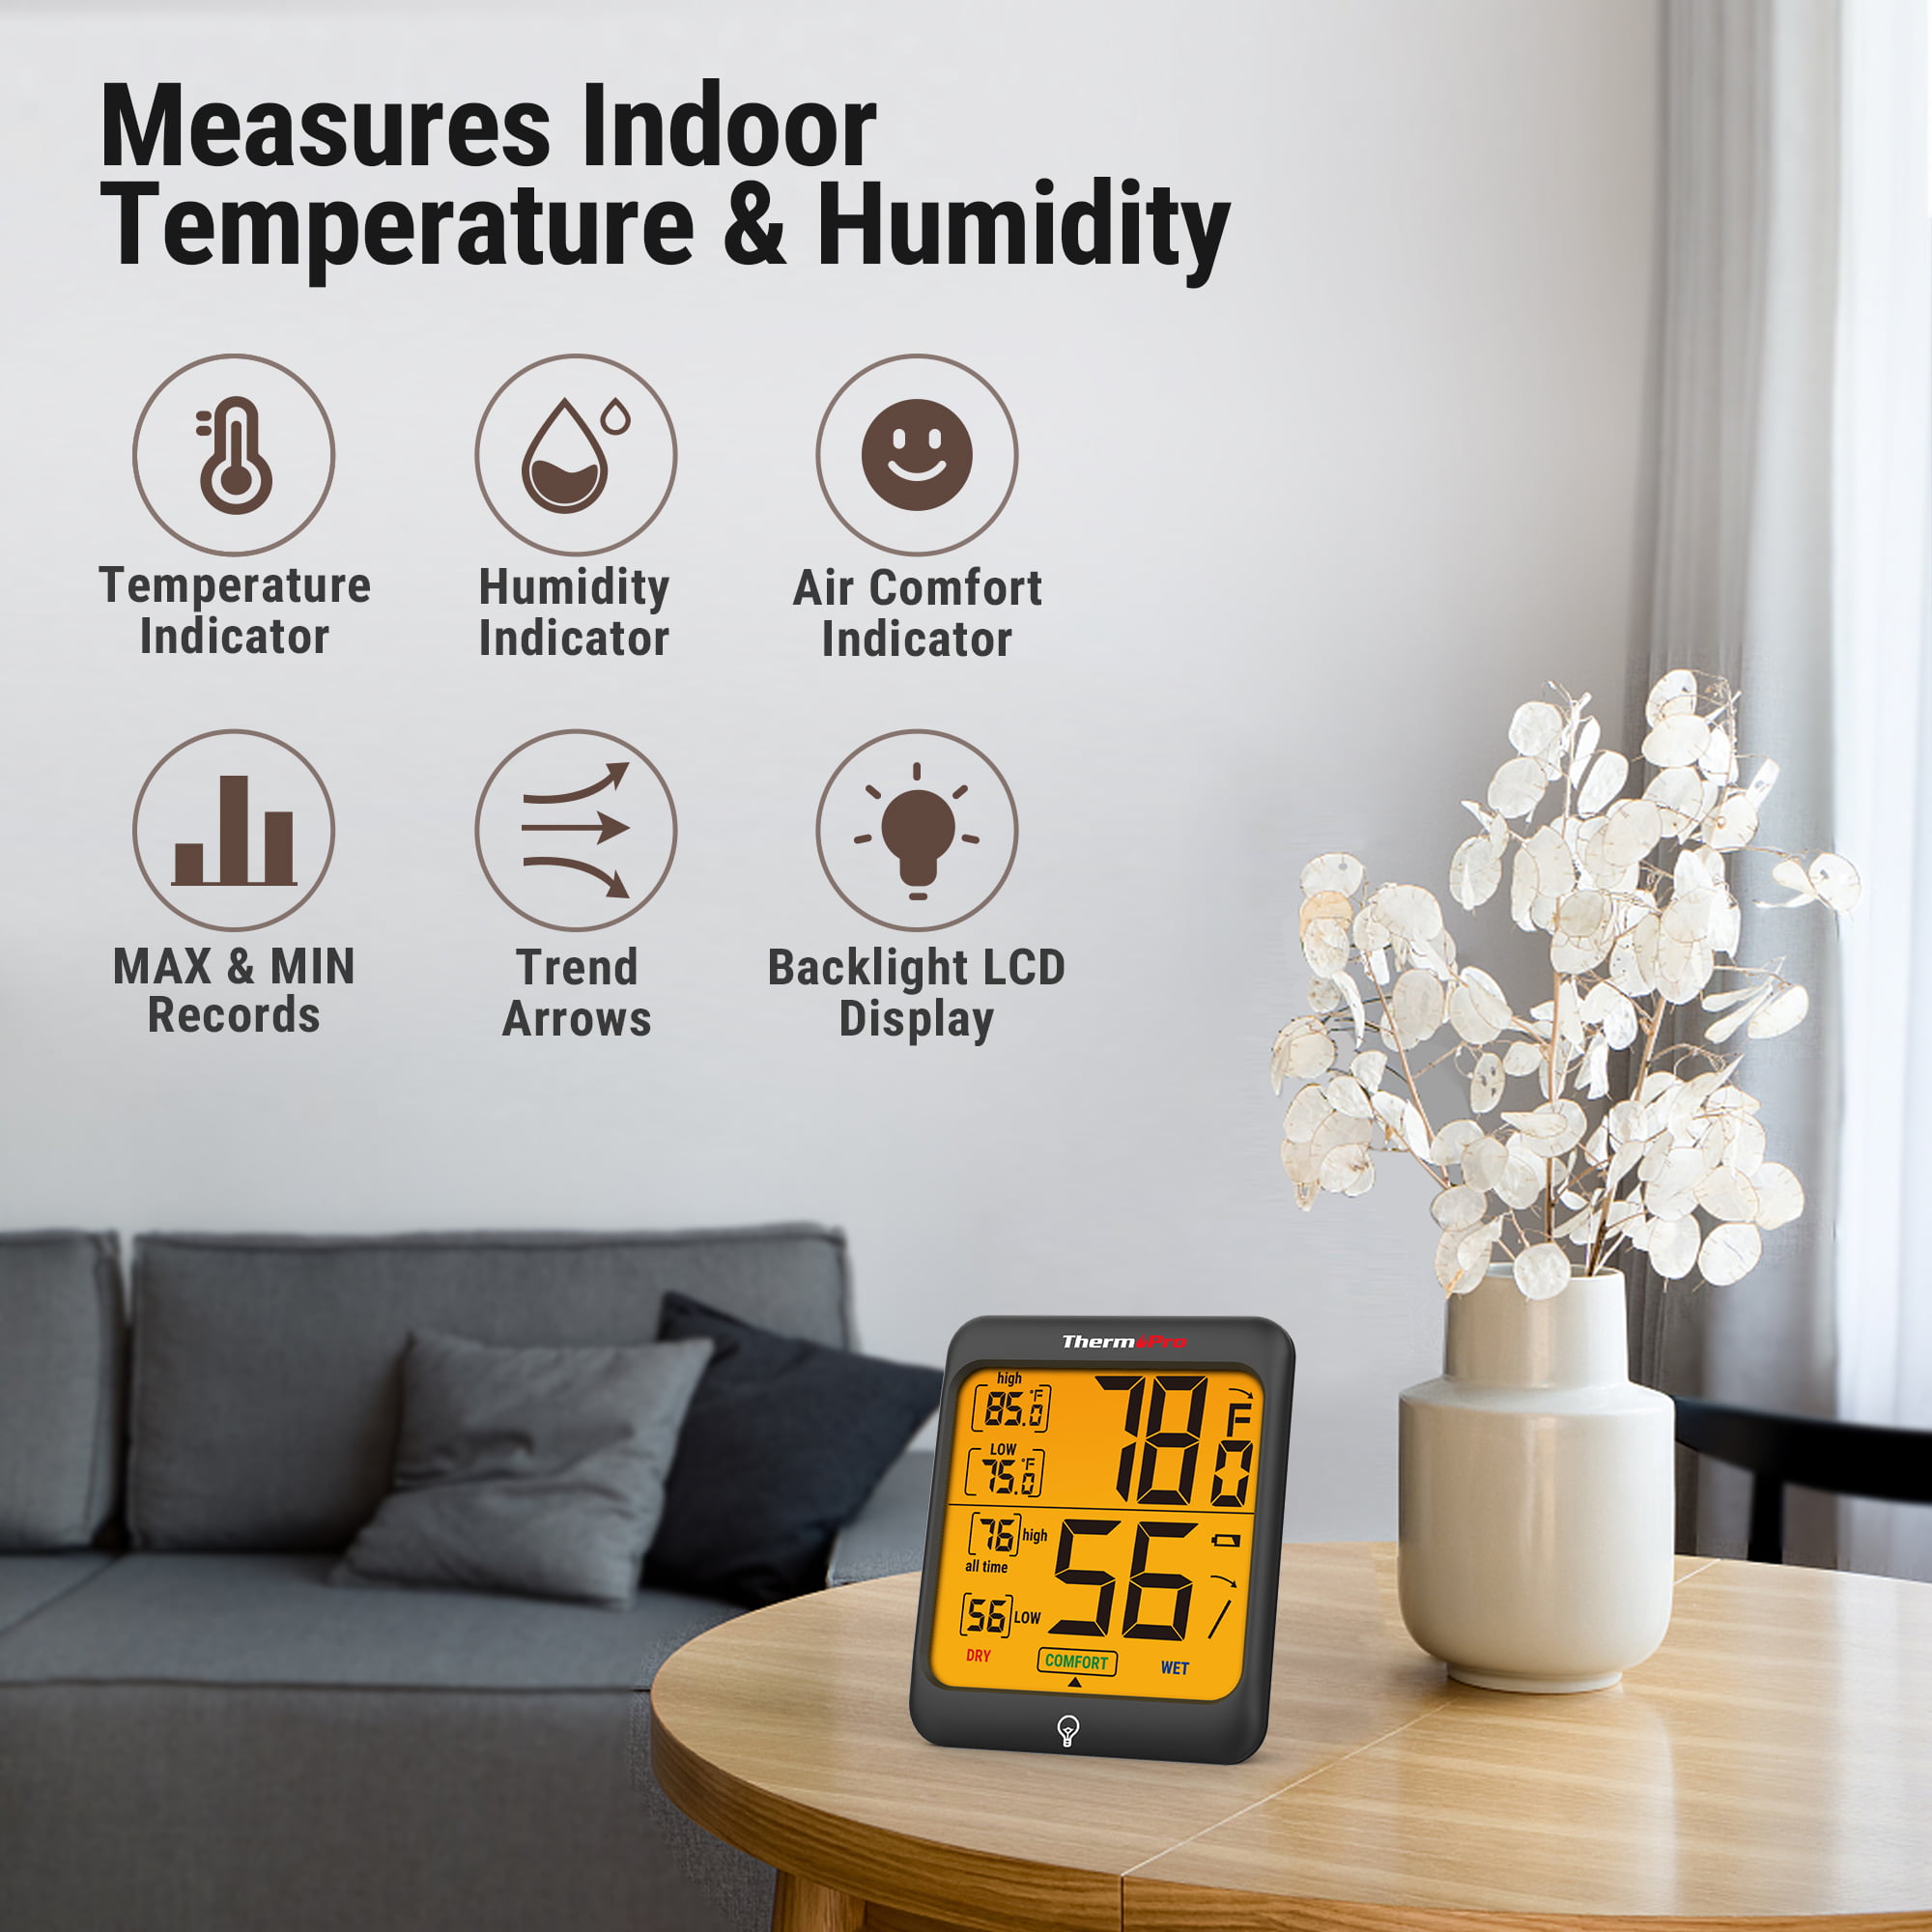 ThermoPro TP-53 Hygrometer Thermometer Humidity Gauge